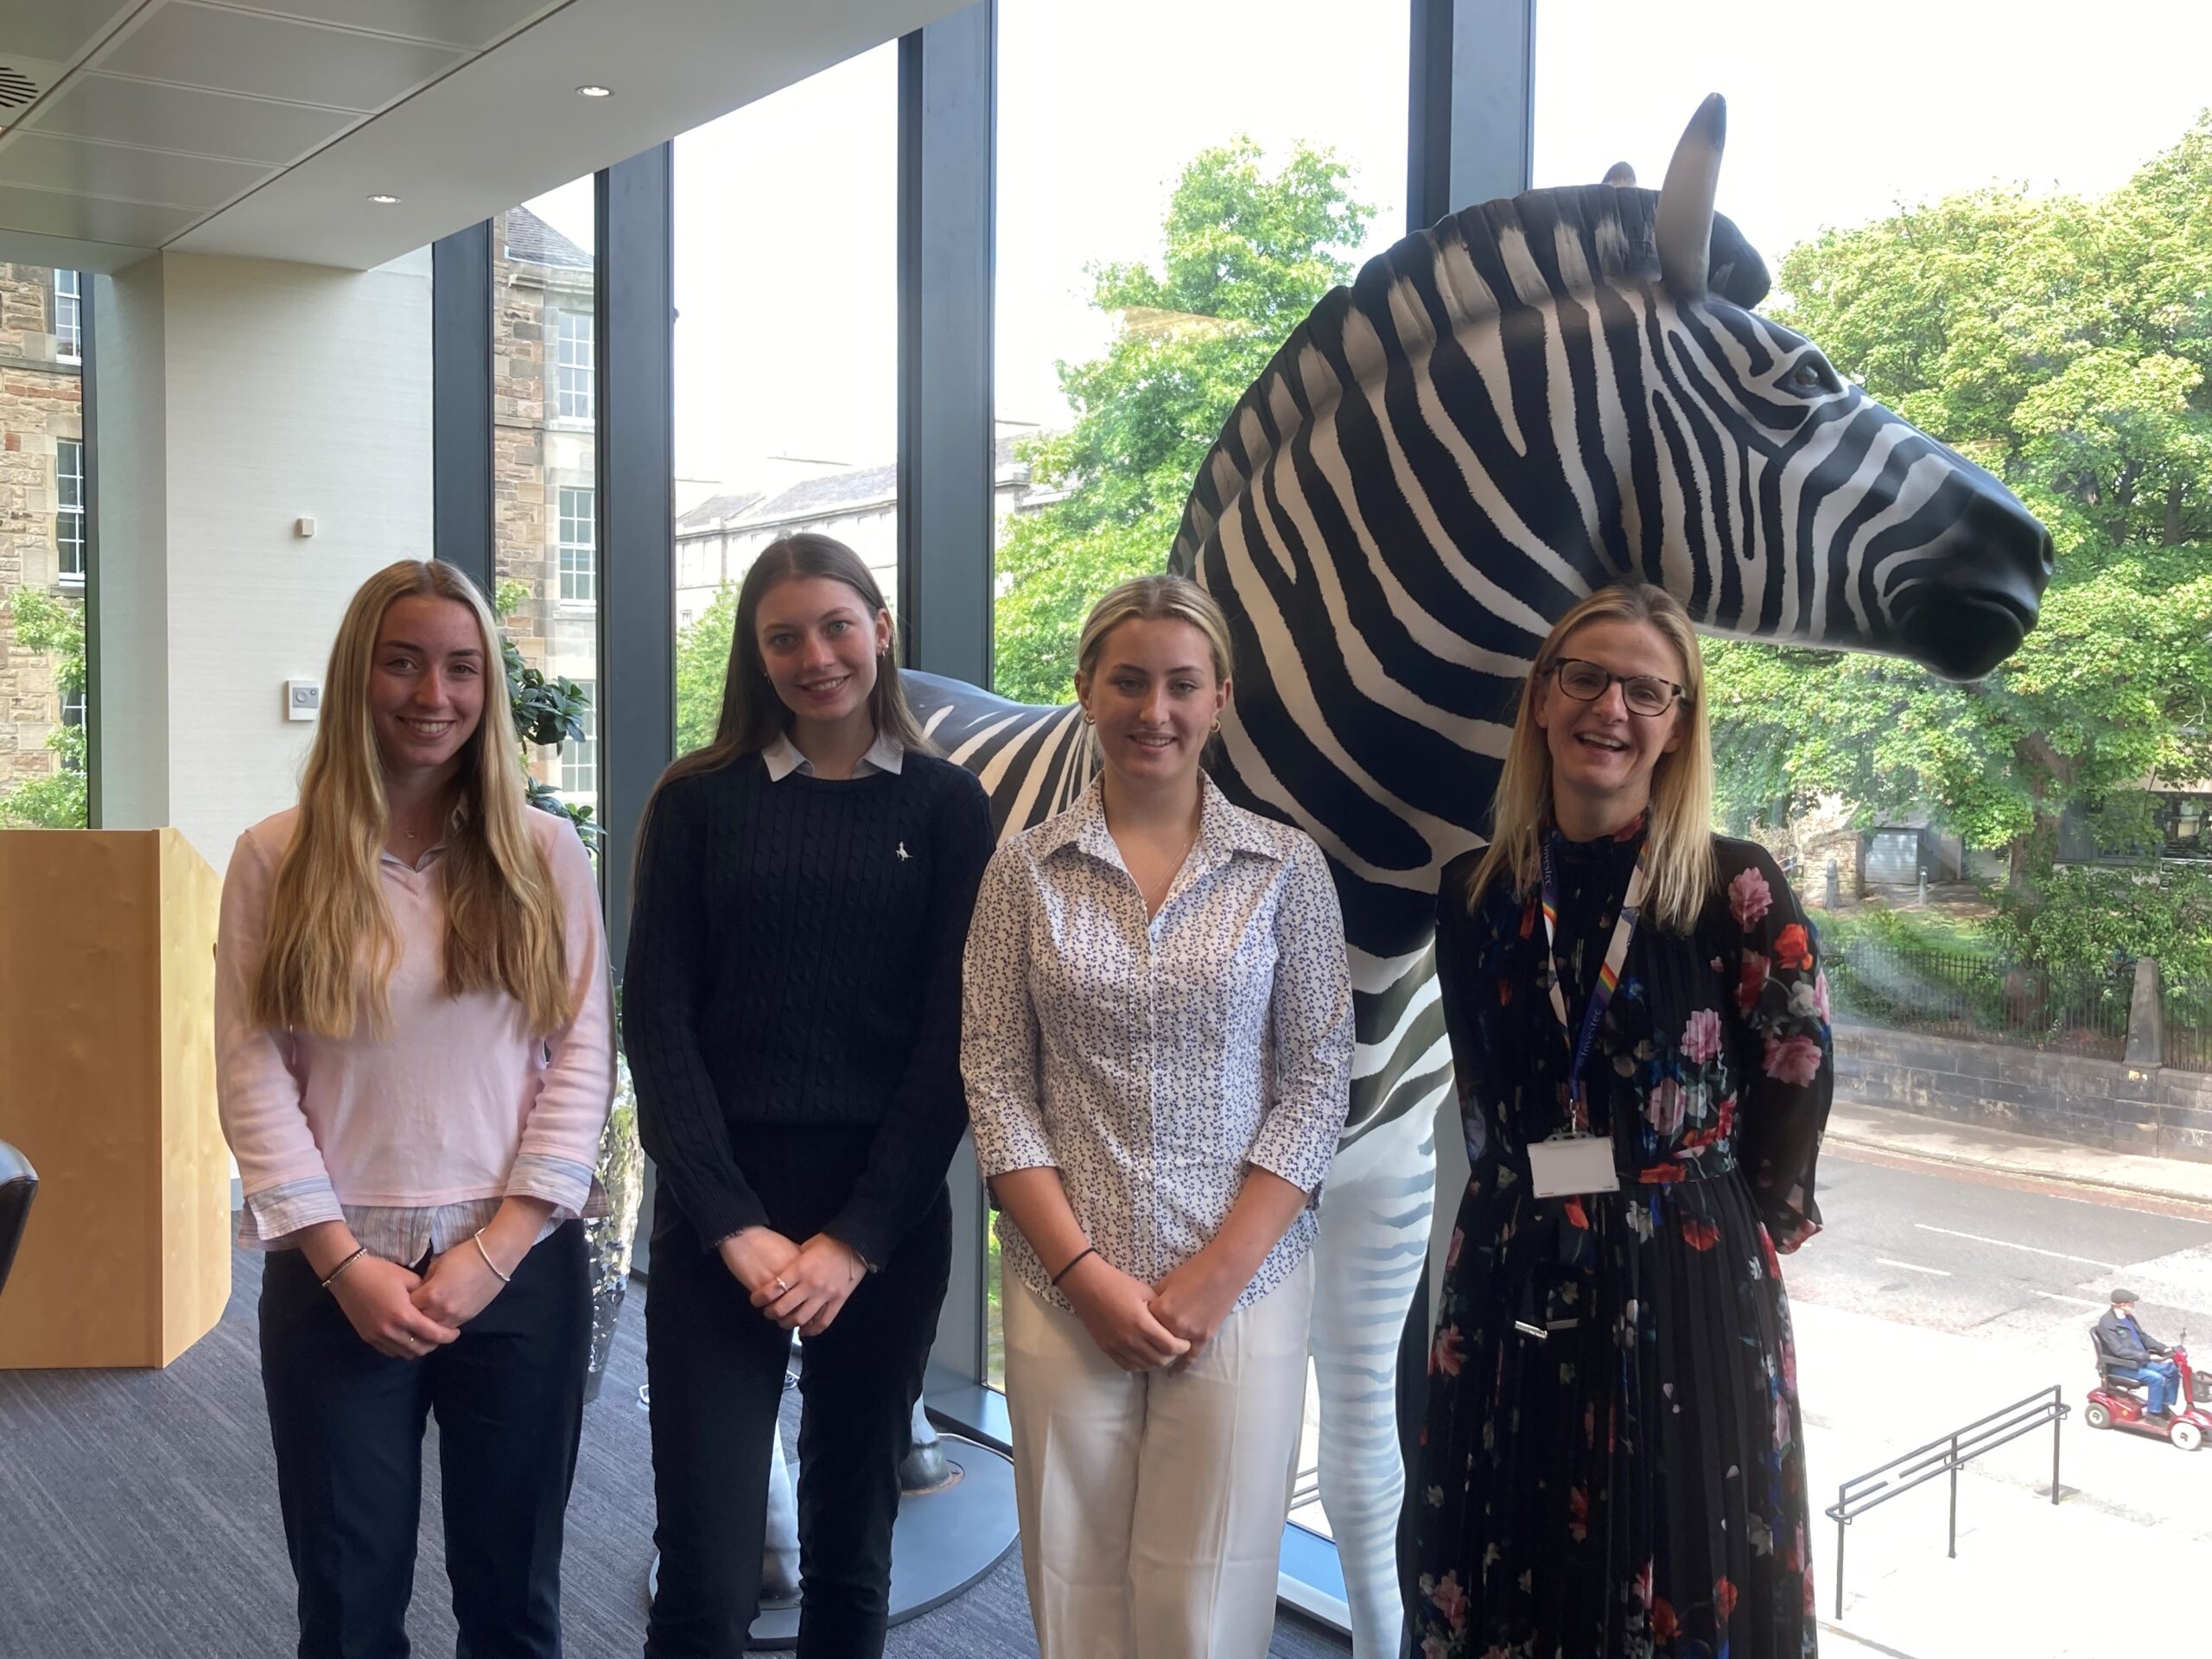 Jess, Isabella and Kirsten at Investec for work experience